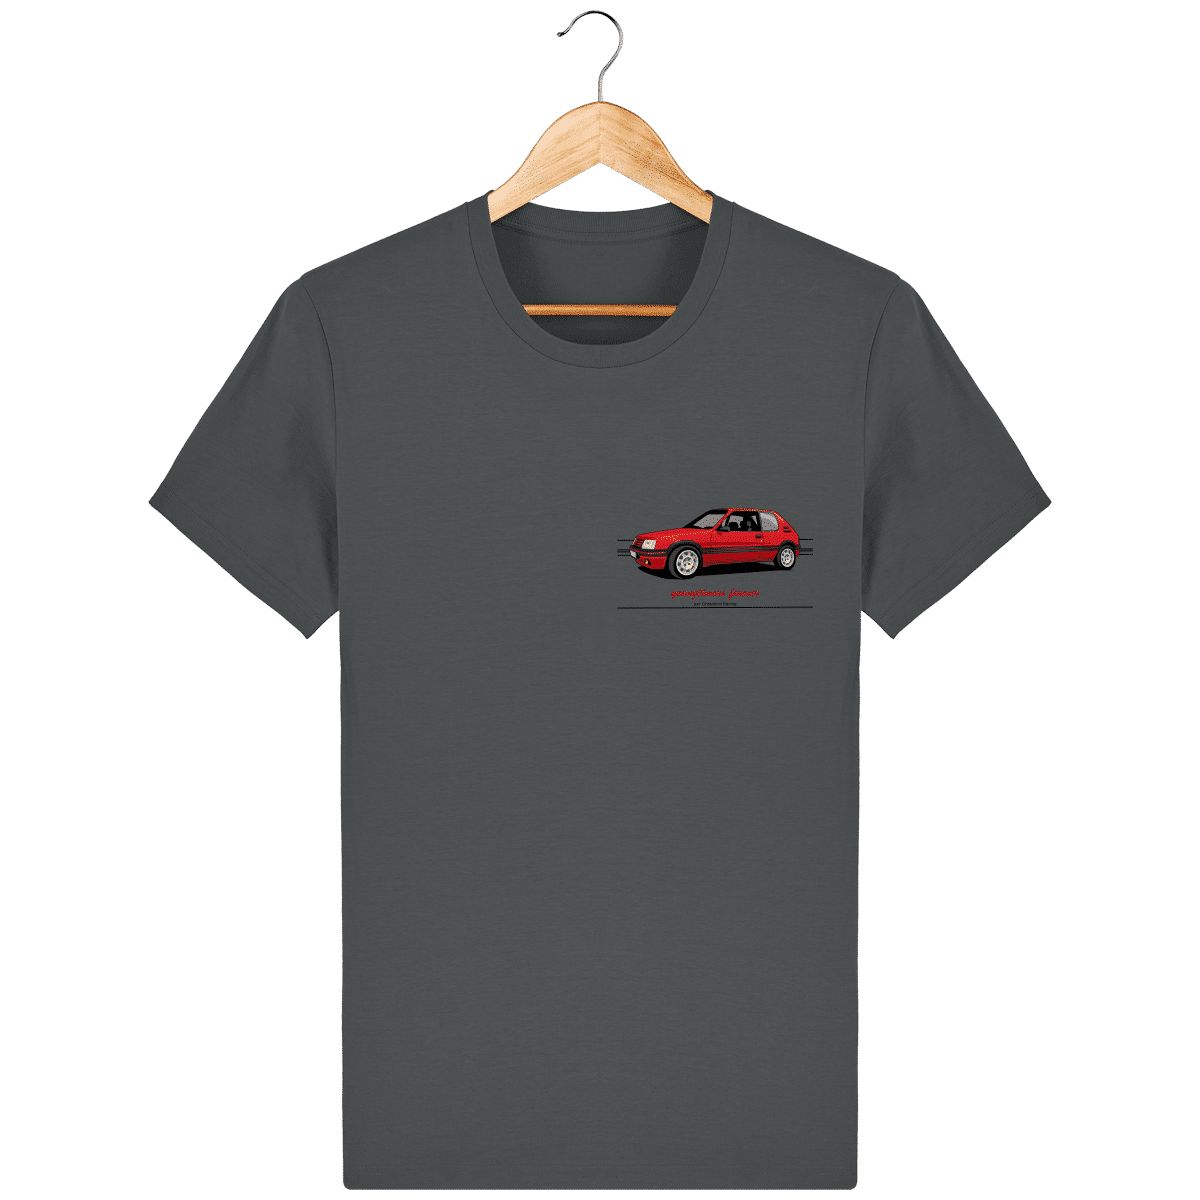 T-Shirt 205 GTI red Vallelunga printed back + front - Greenbird-racing